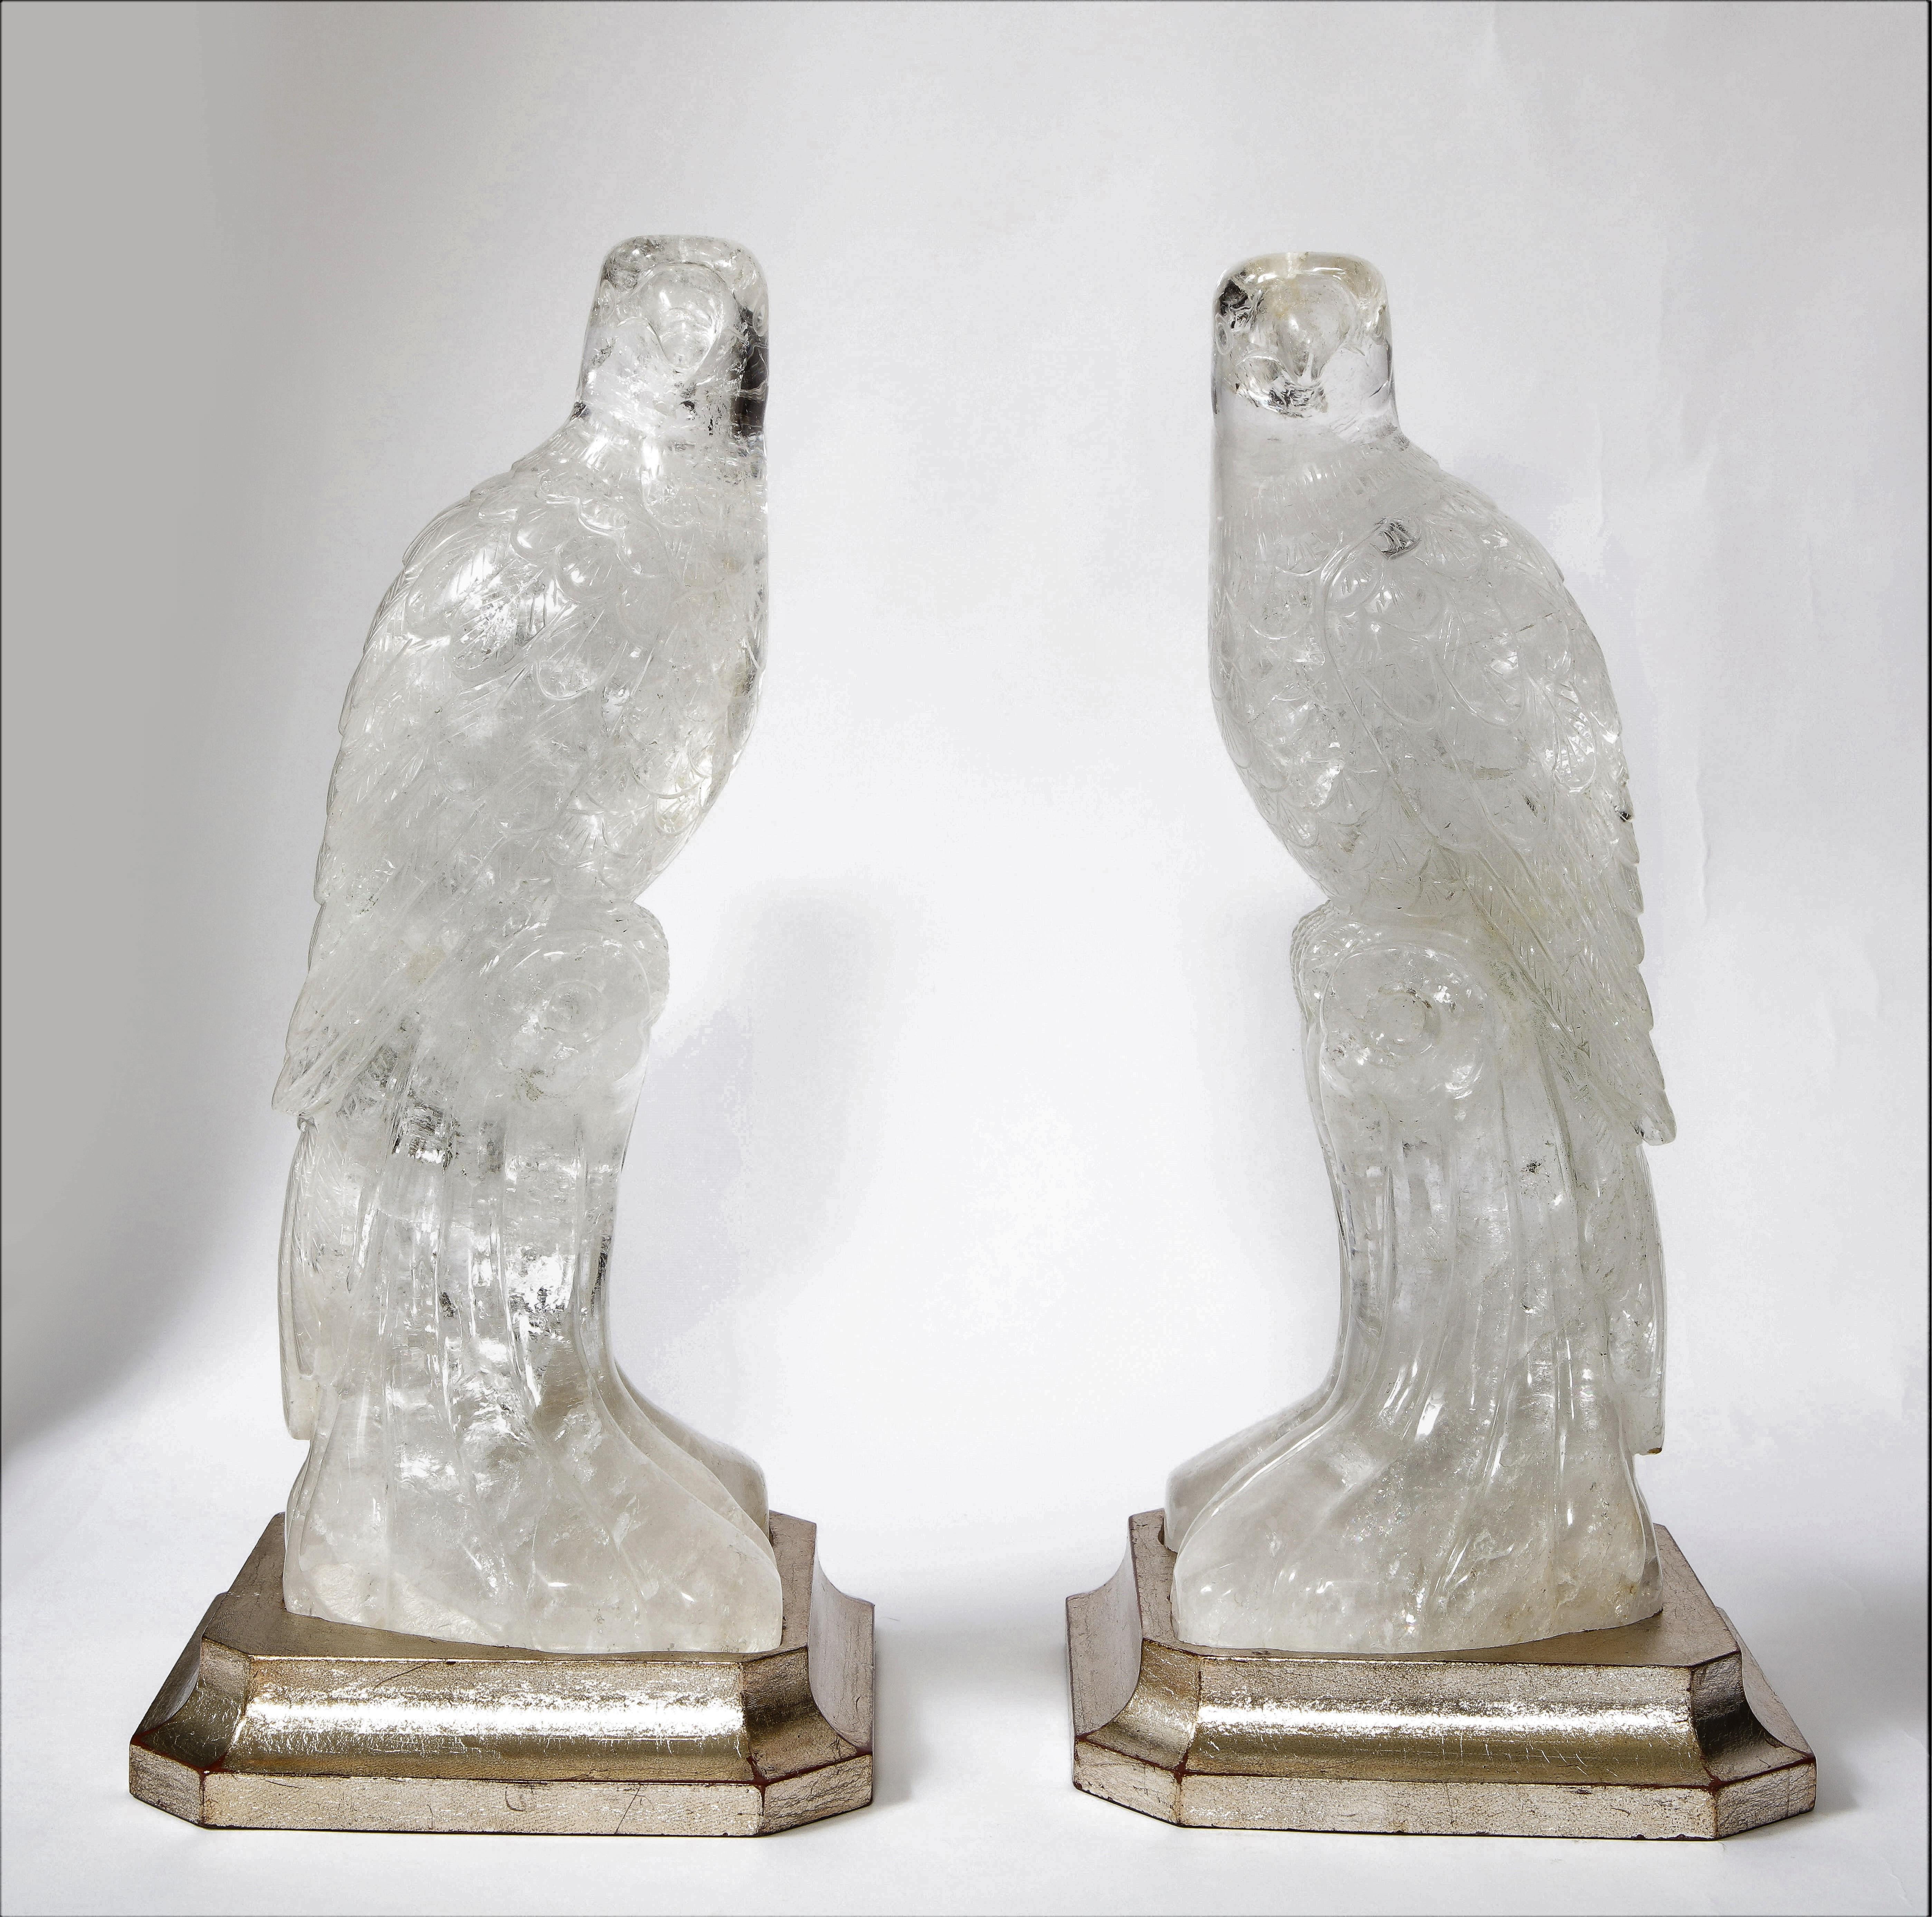 Pair of Hand Carved Clear Rock-Crystal Quartz Parrots on Silver-Gilt Bases For Sale 6